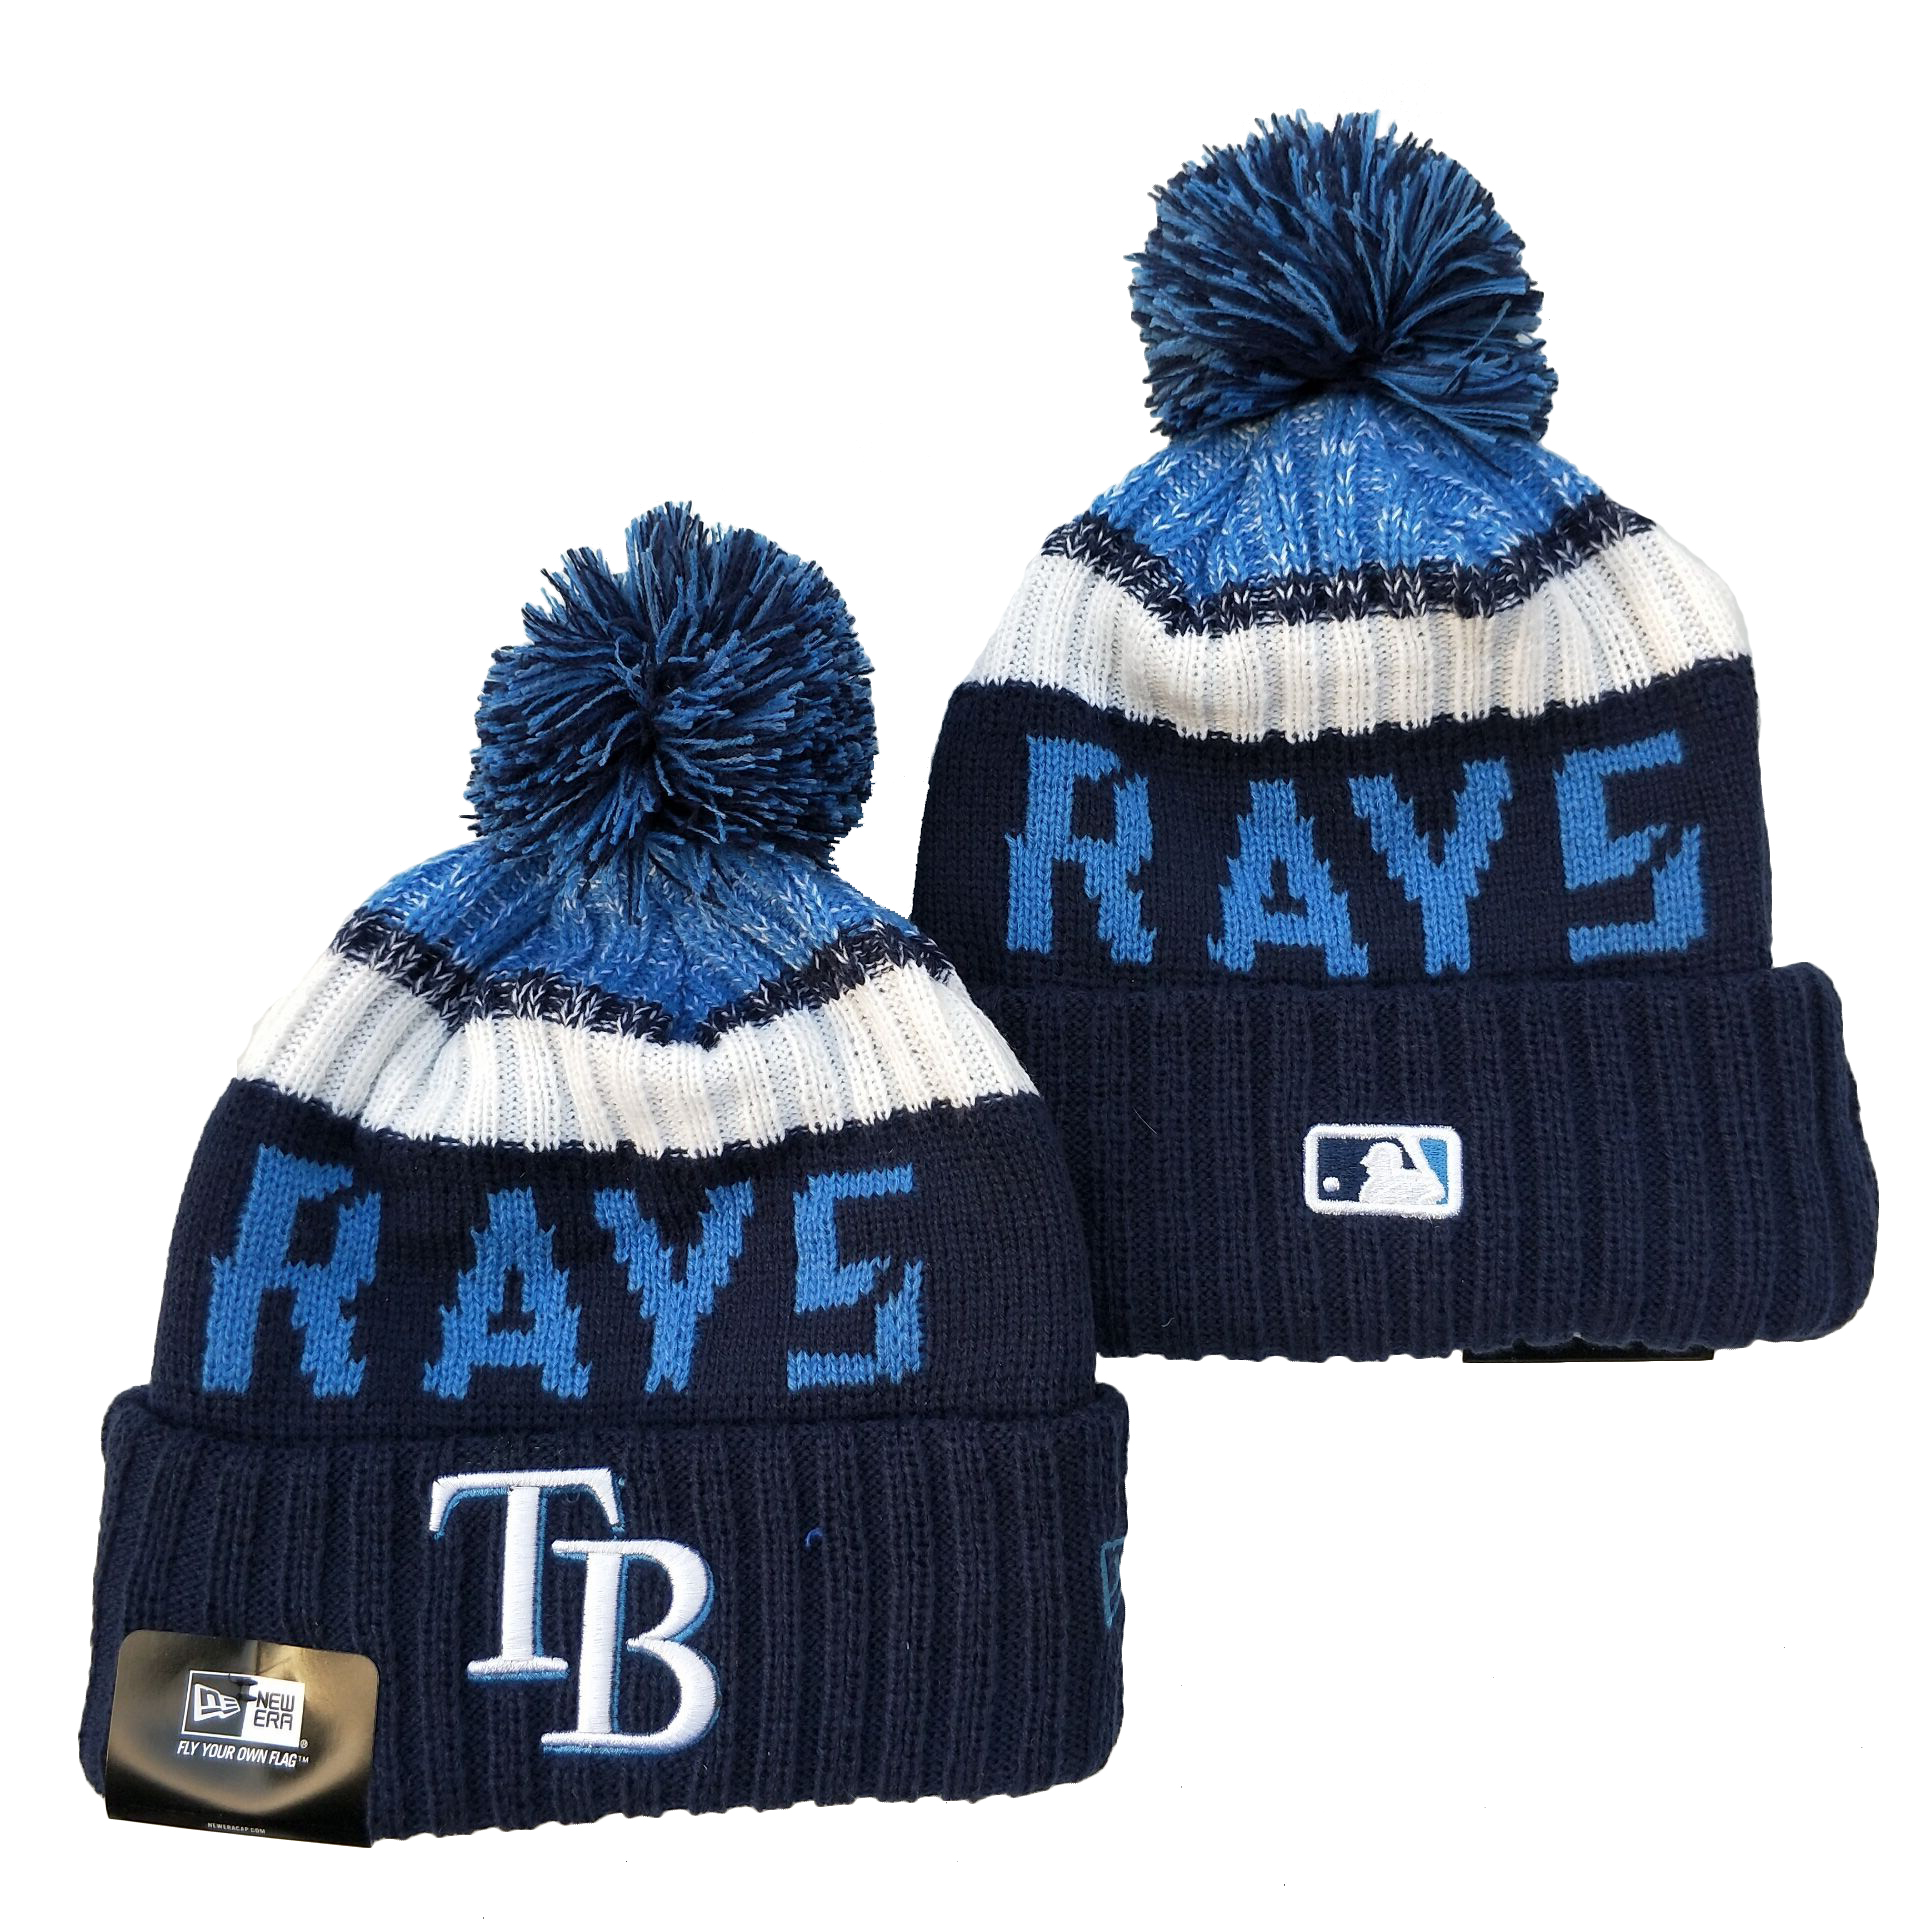 Tampa Bay Rays Knit Hats 001